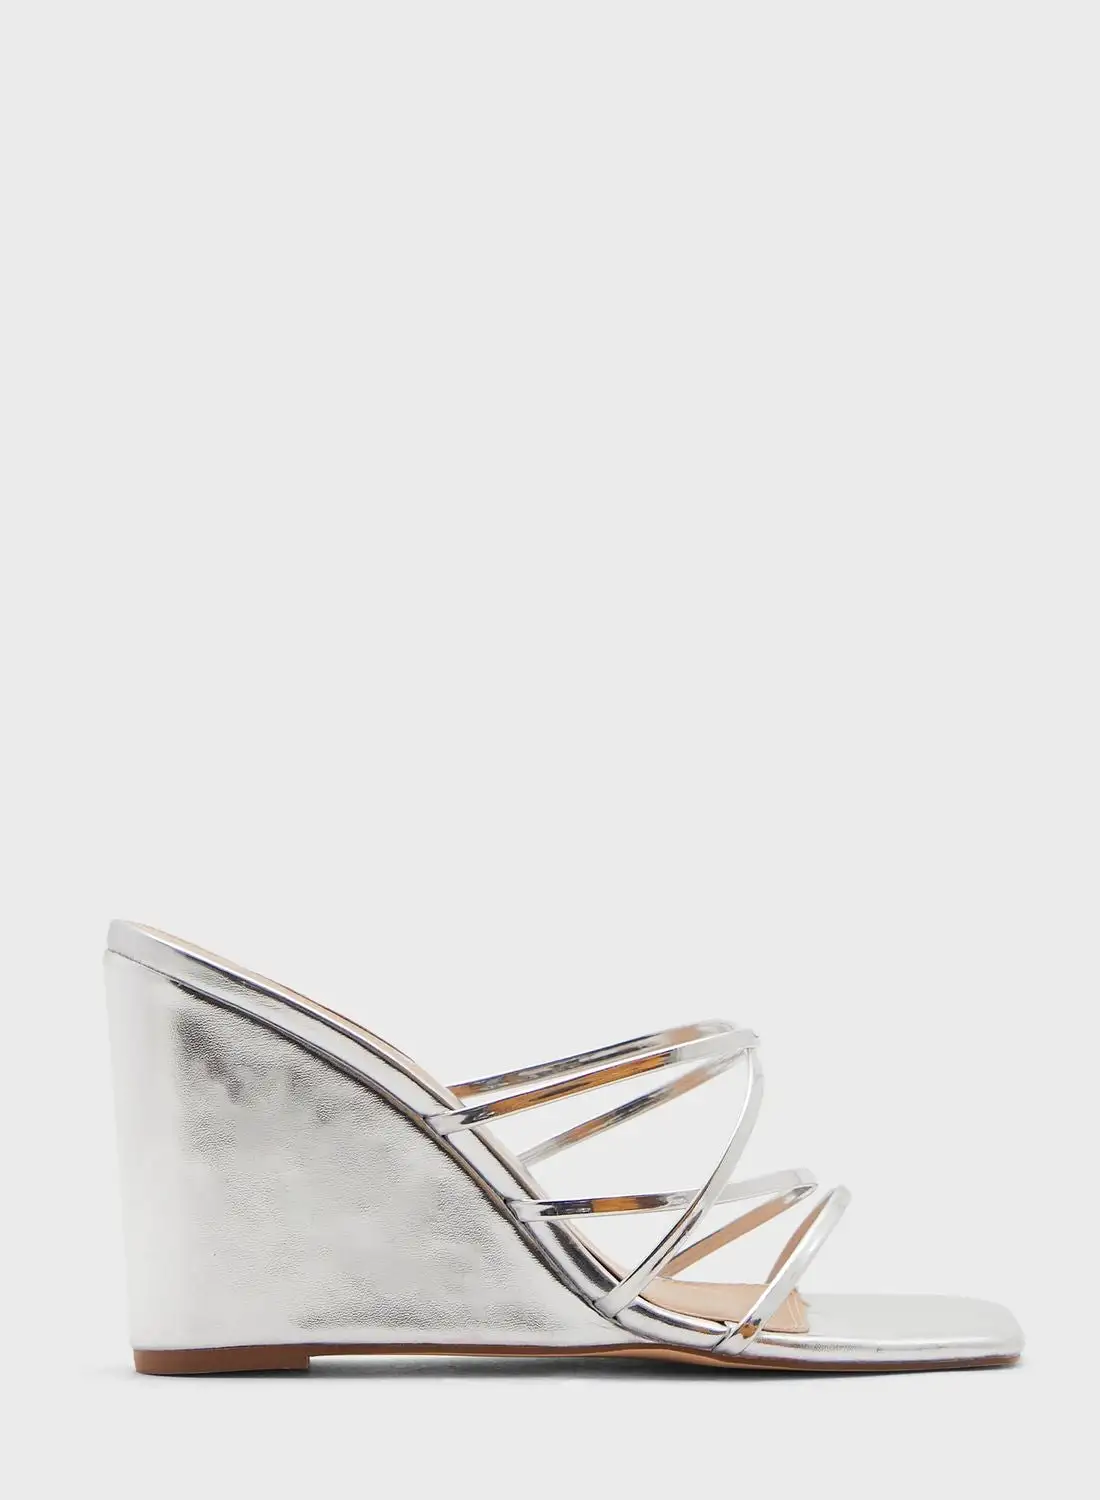 TOPSHOP Rocco Strappy Heeled Wedge Sandals